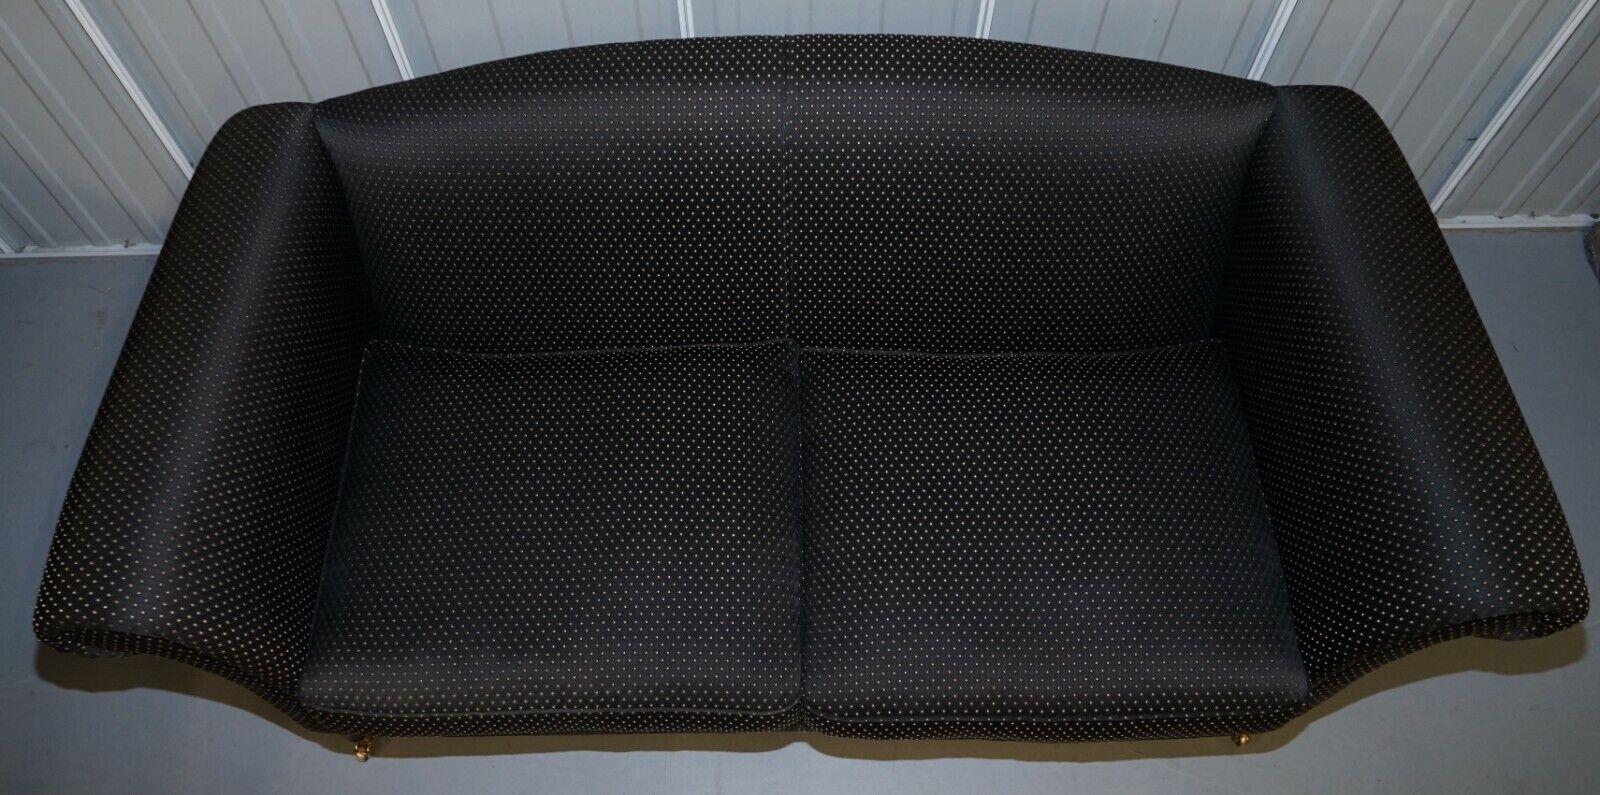 Upholstery HAND MADE BLACK & SiLVER UPHOLSTERED SOFA LIGHT HARDWOOD FRAME ONE OF TWO PIECES For Sale